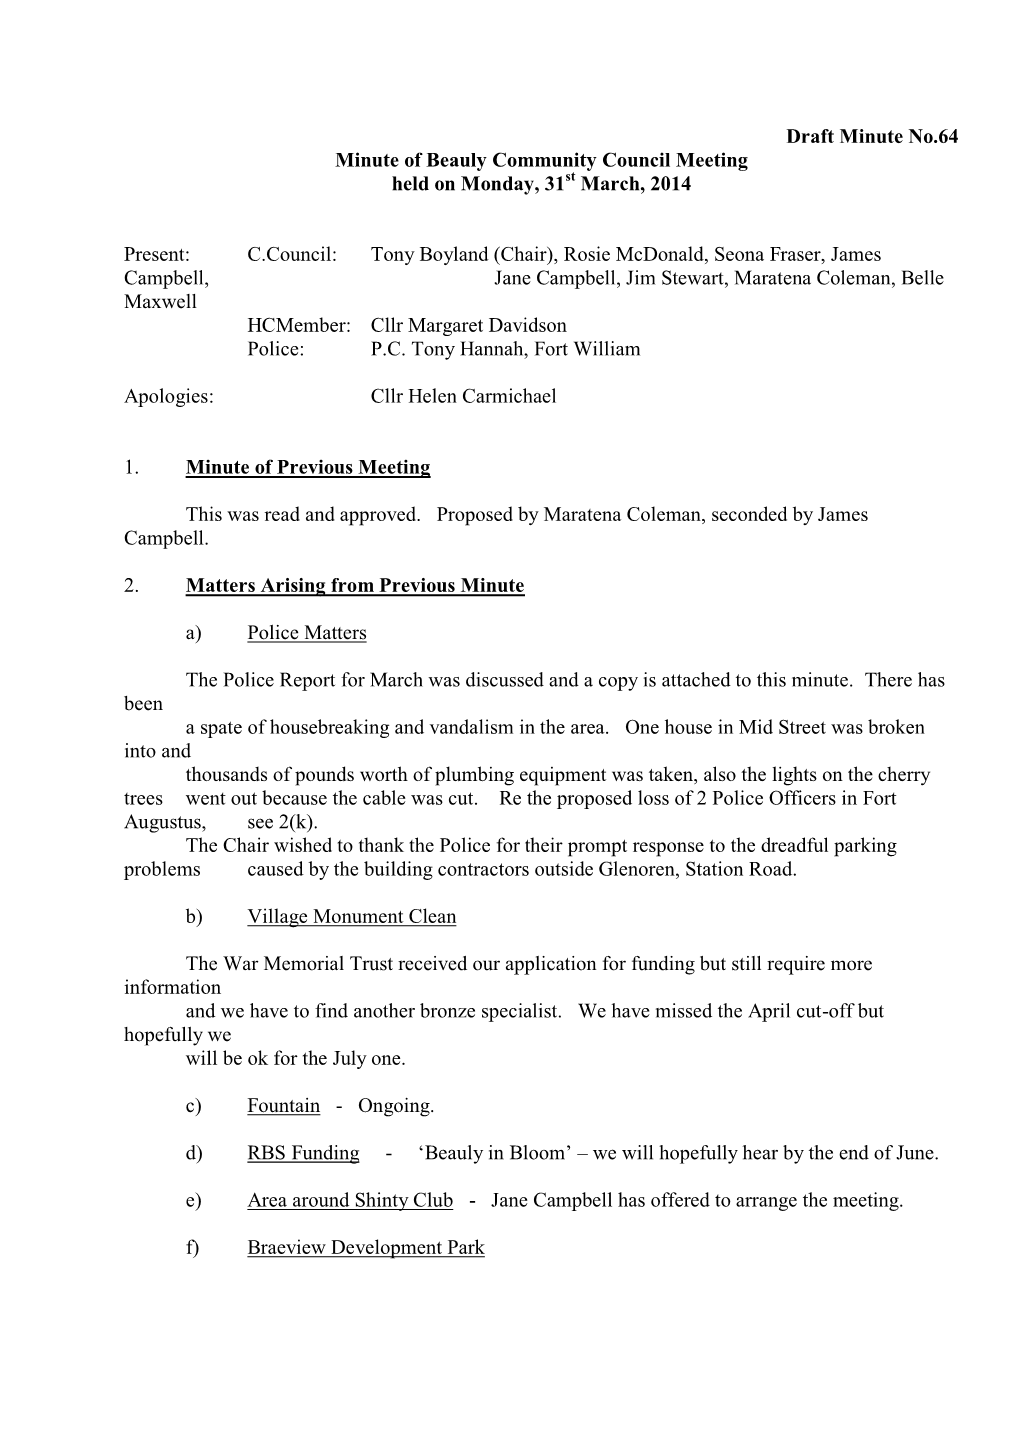 Draft Minute No.64 Minute of Beauly Community Council Meeting Held on Monday, 31St March, 2014